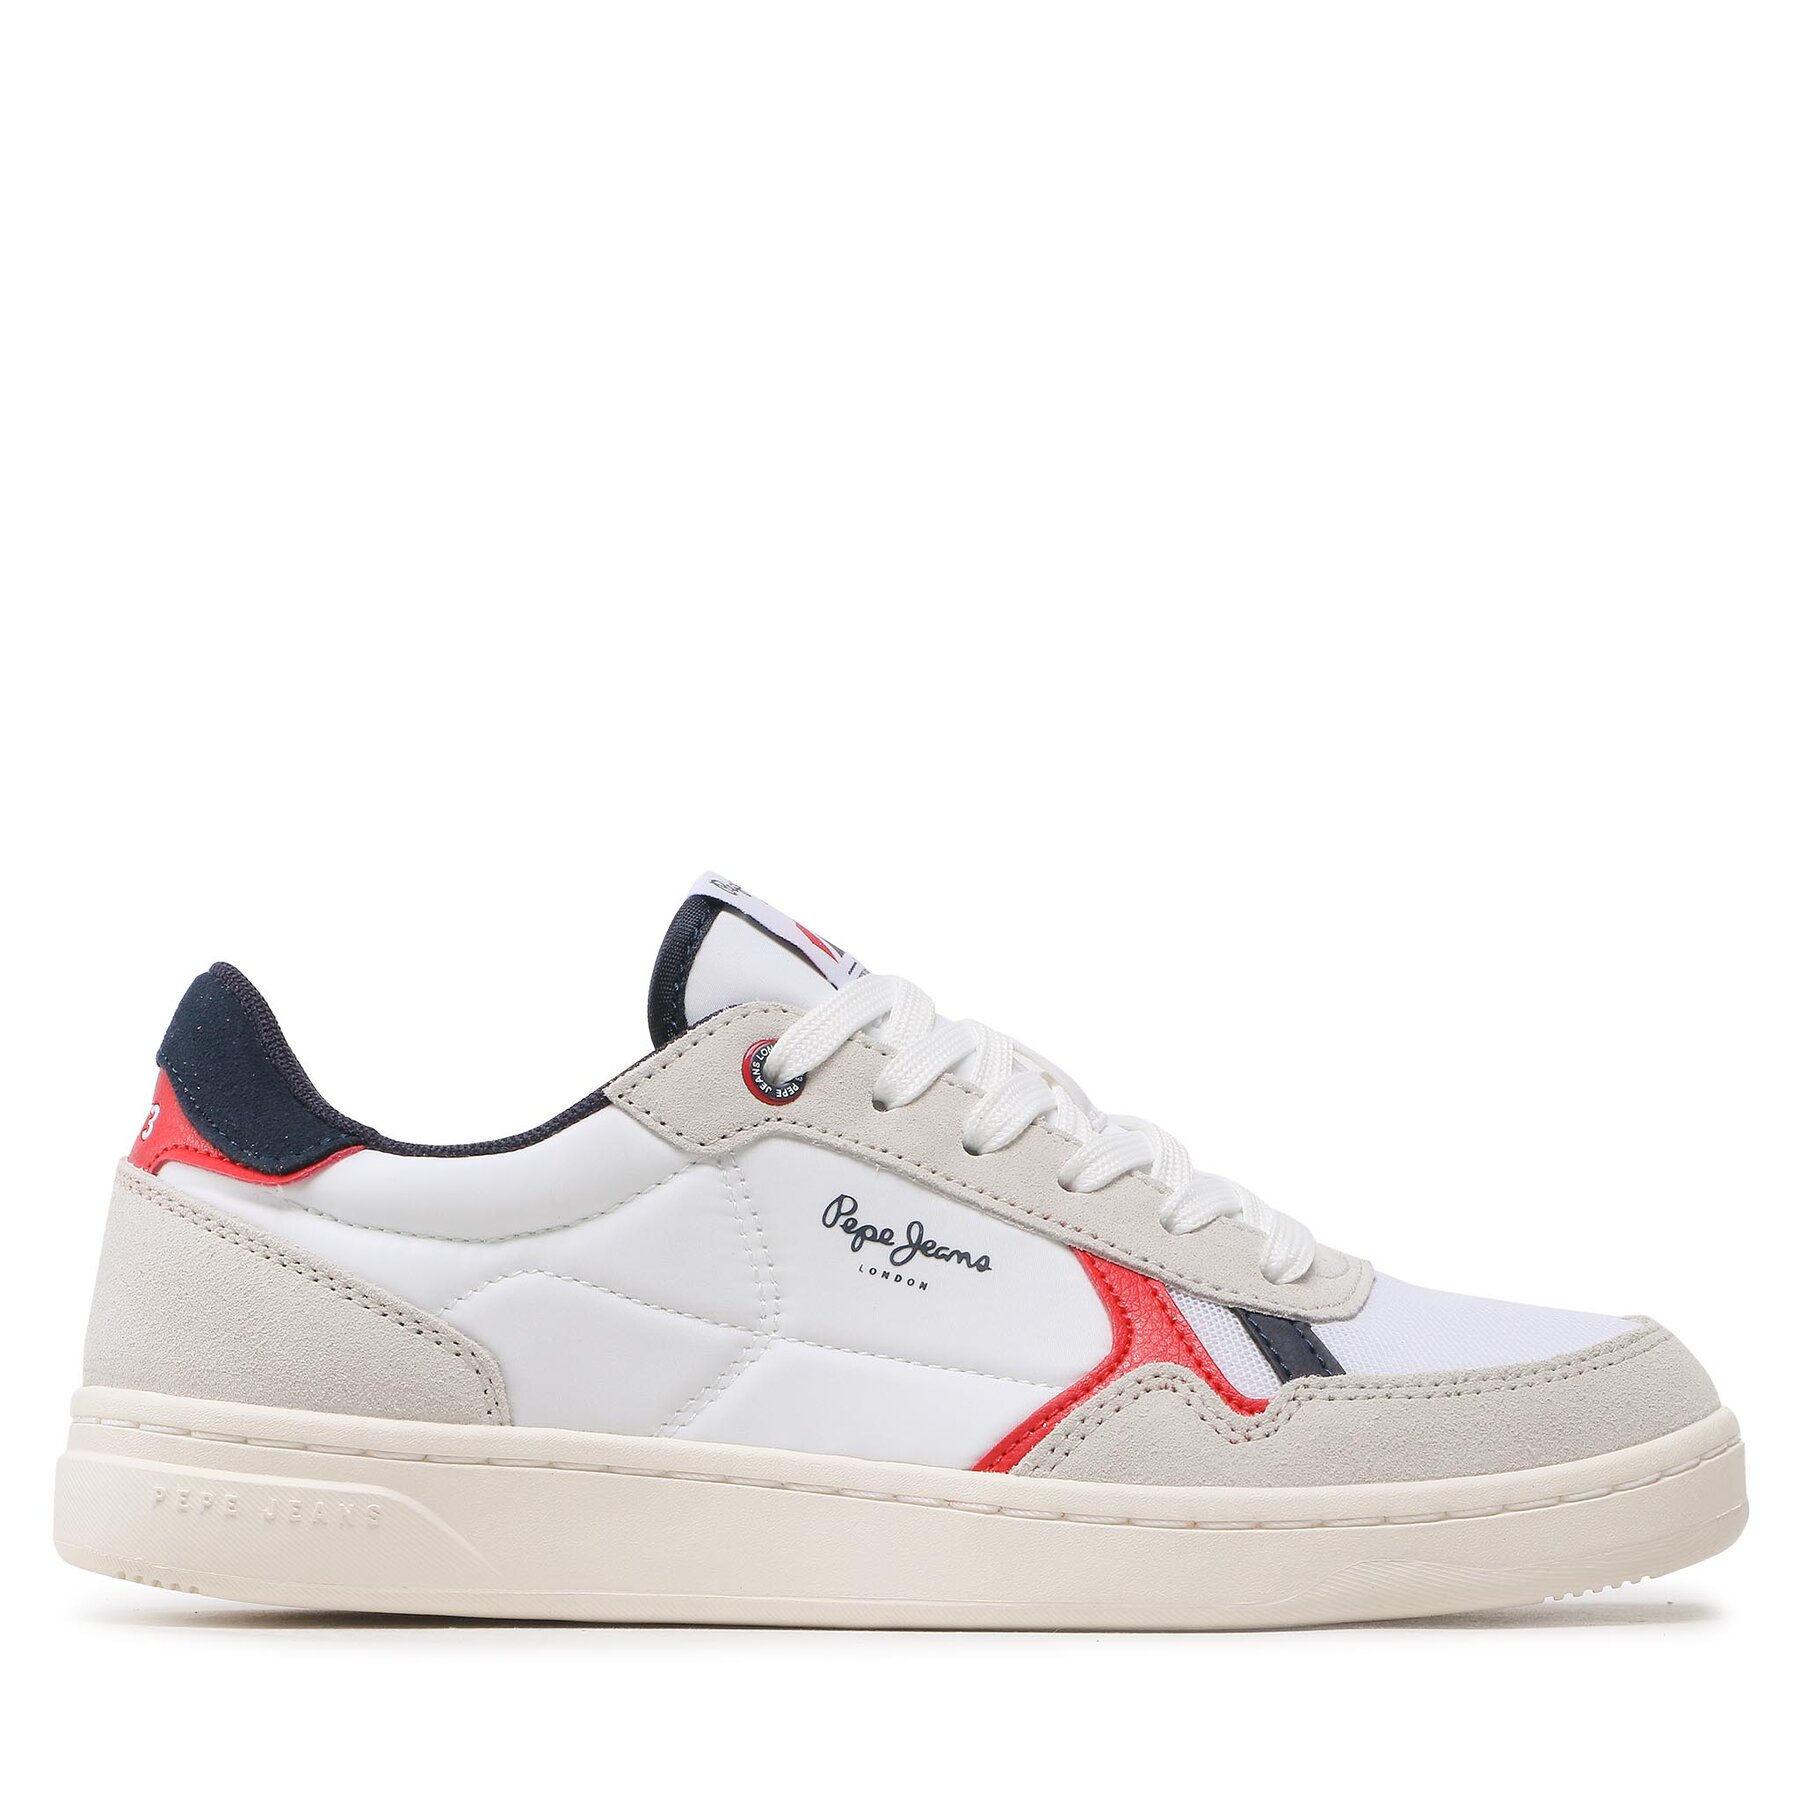 Sneakers Pepe Jeans Kore Vintage M PMS30900 White 800 von Pepe Jeans